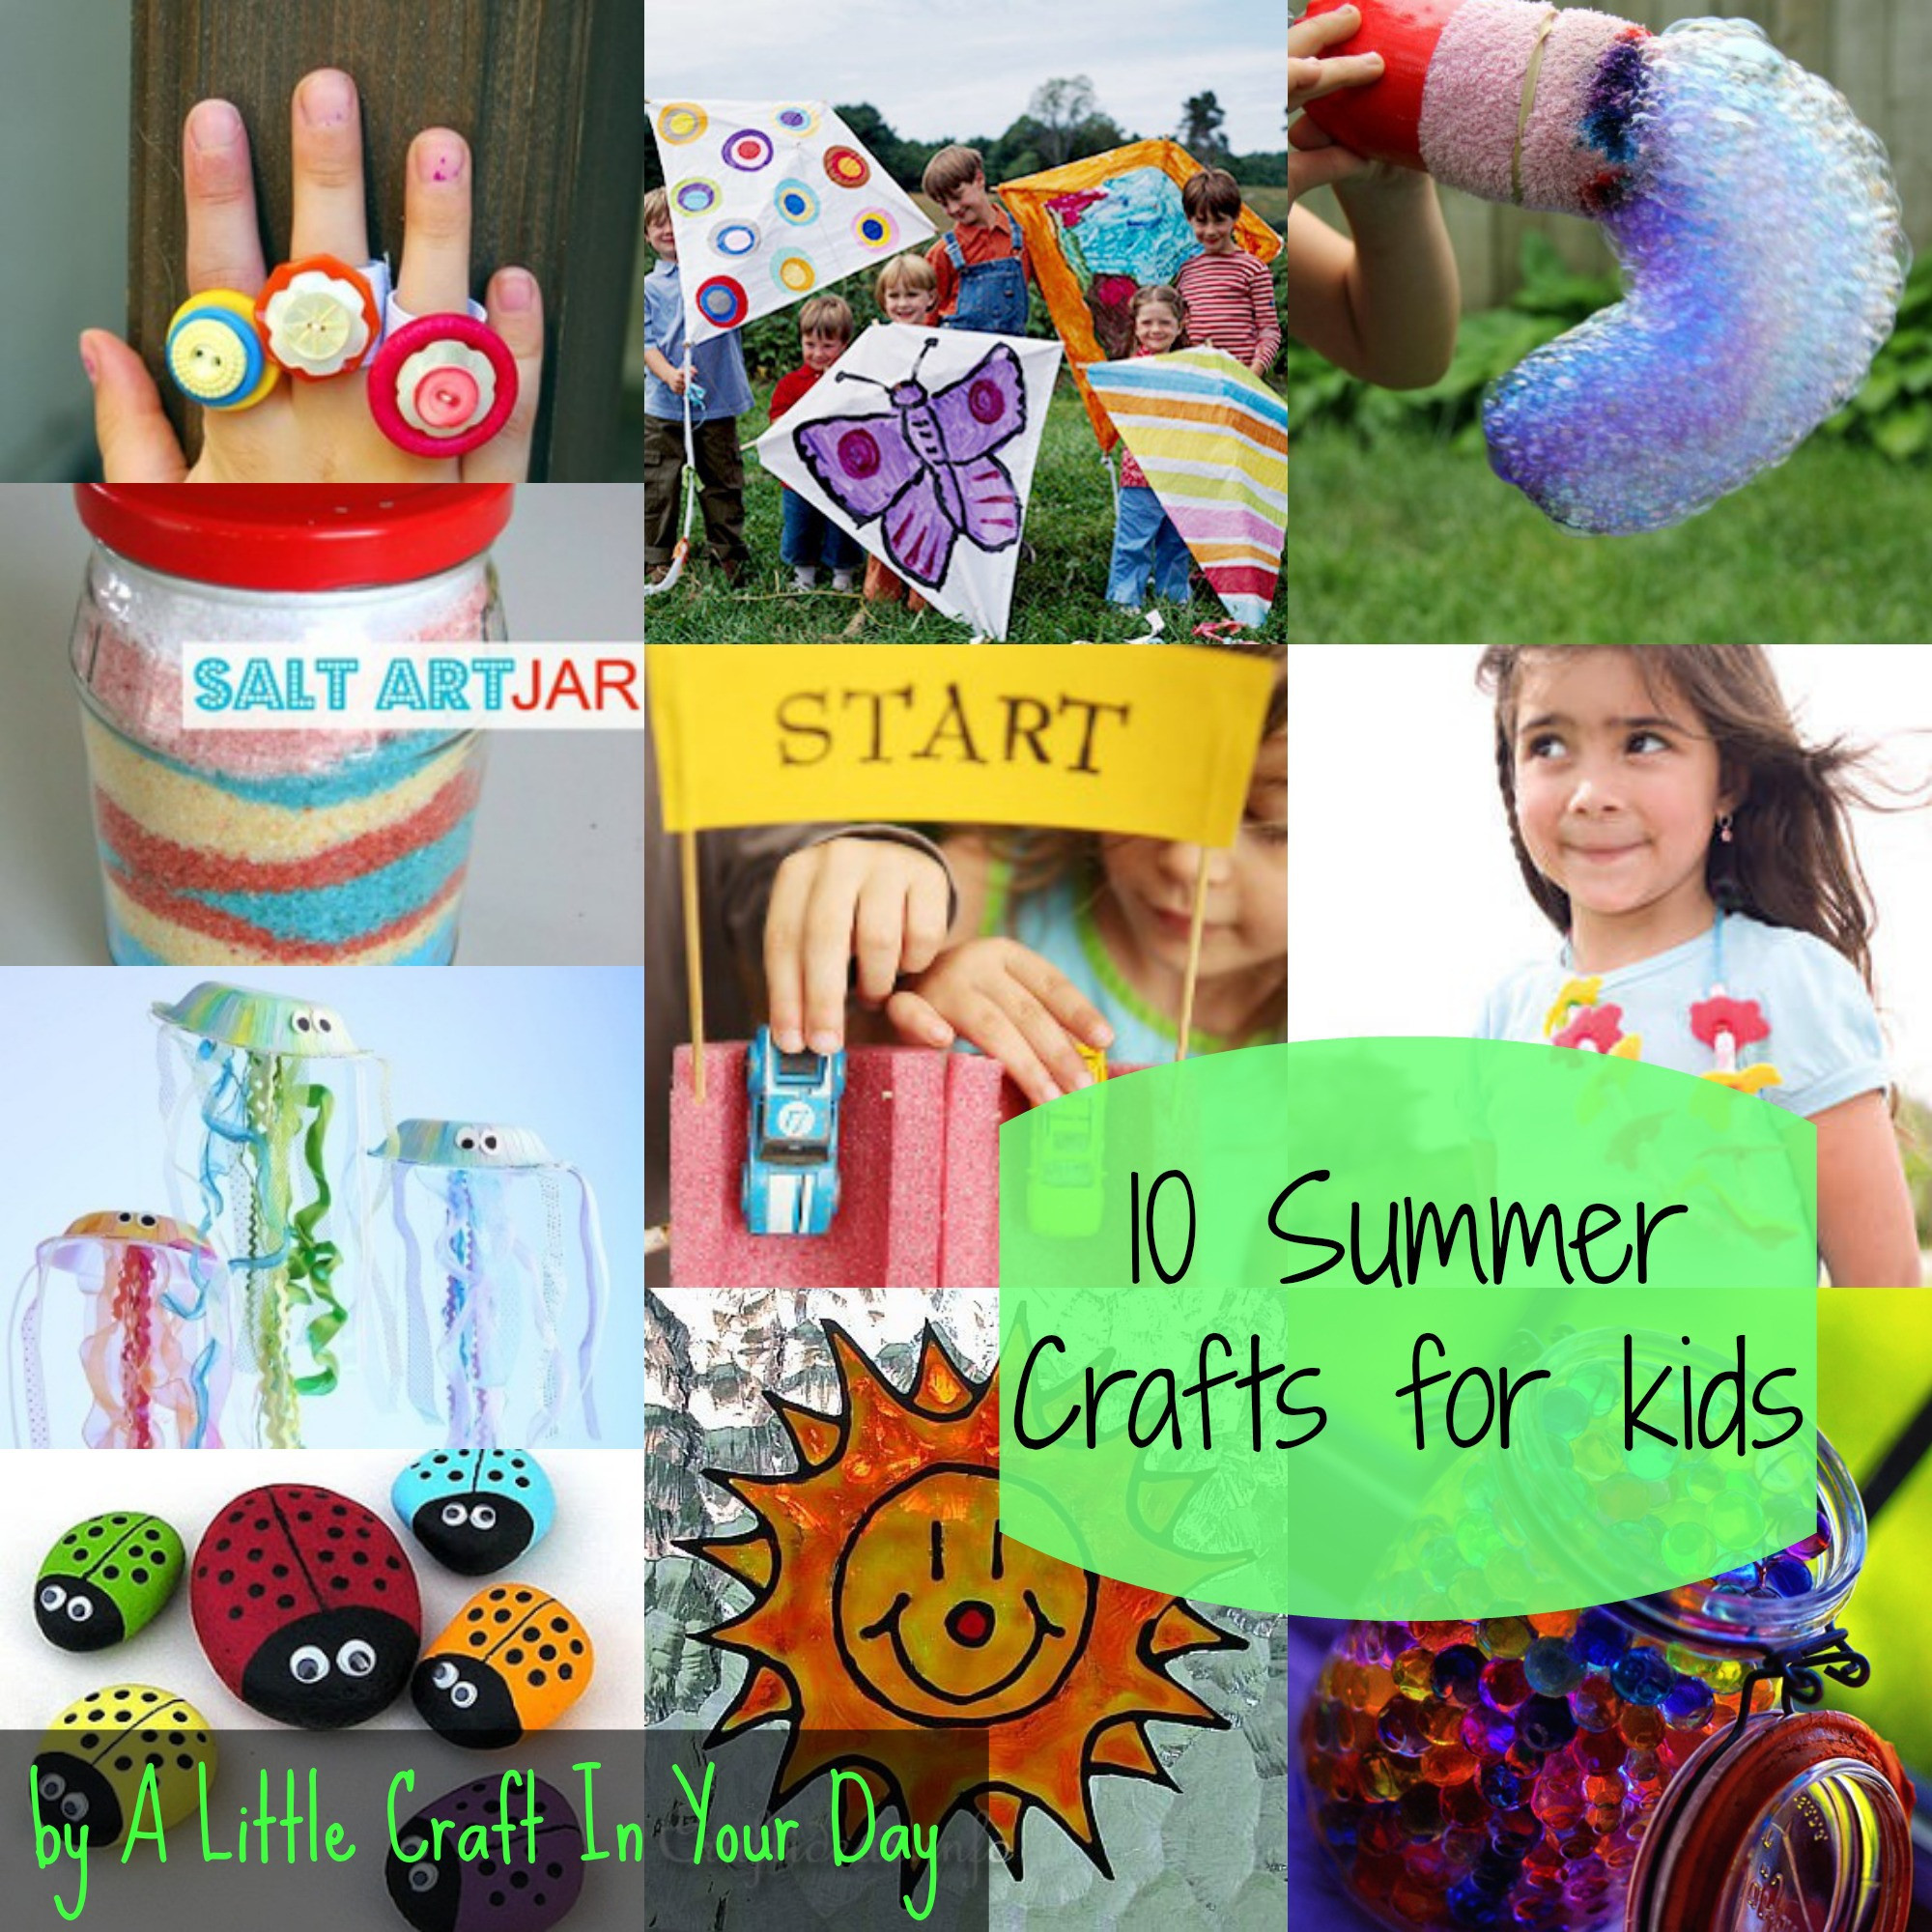 Crafts To Do In The Summer
 20 Summer Kid Crafts A Little Craft In Your DayA Little